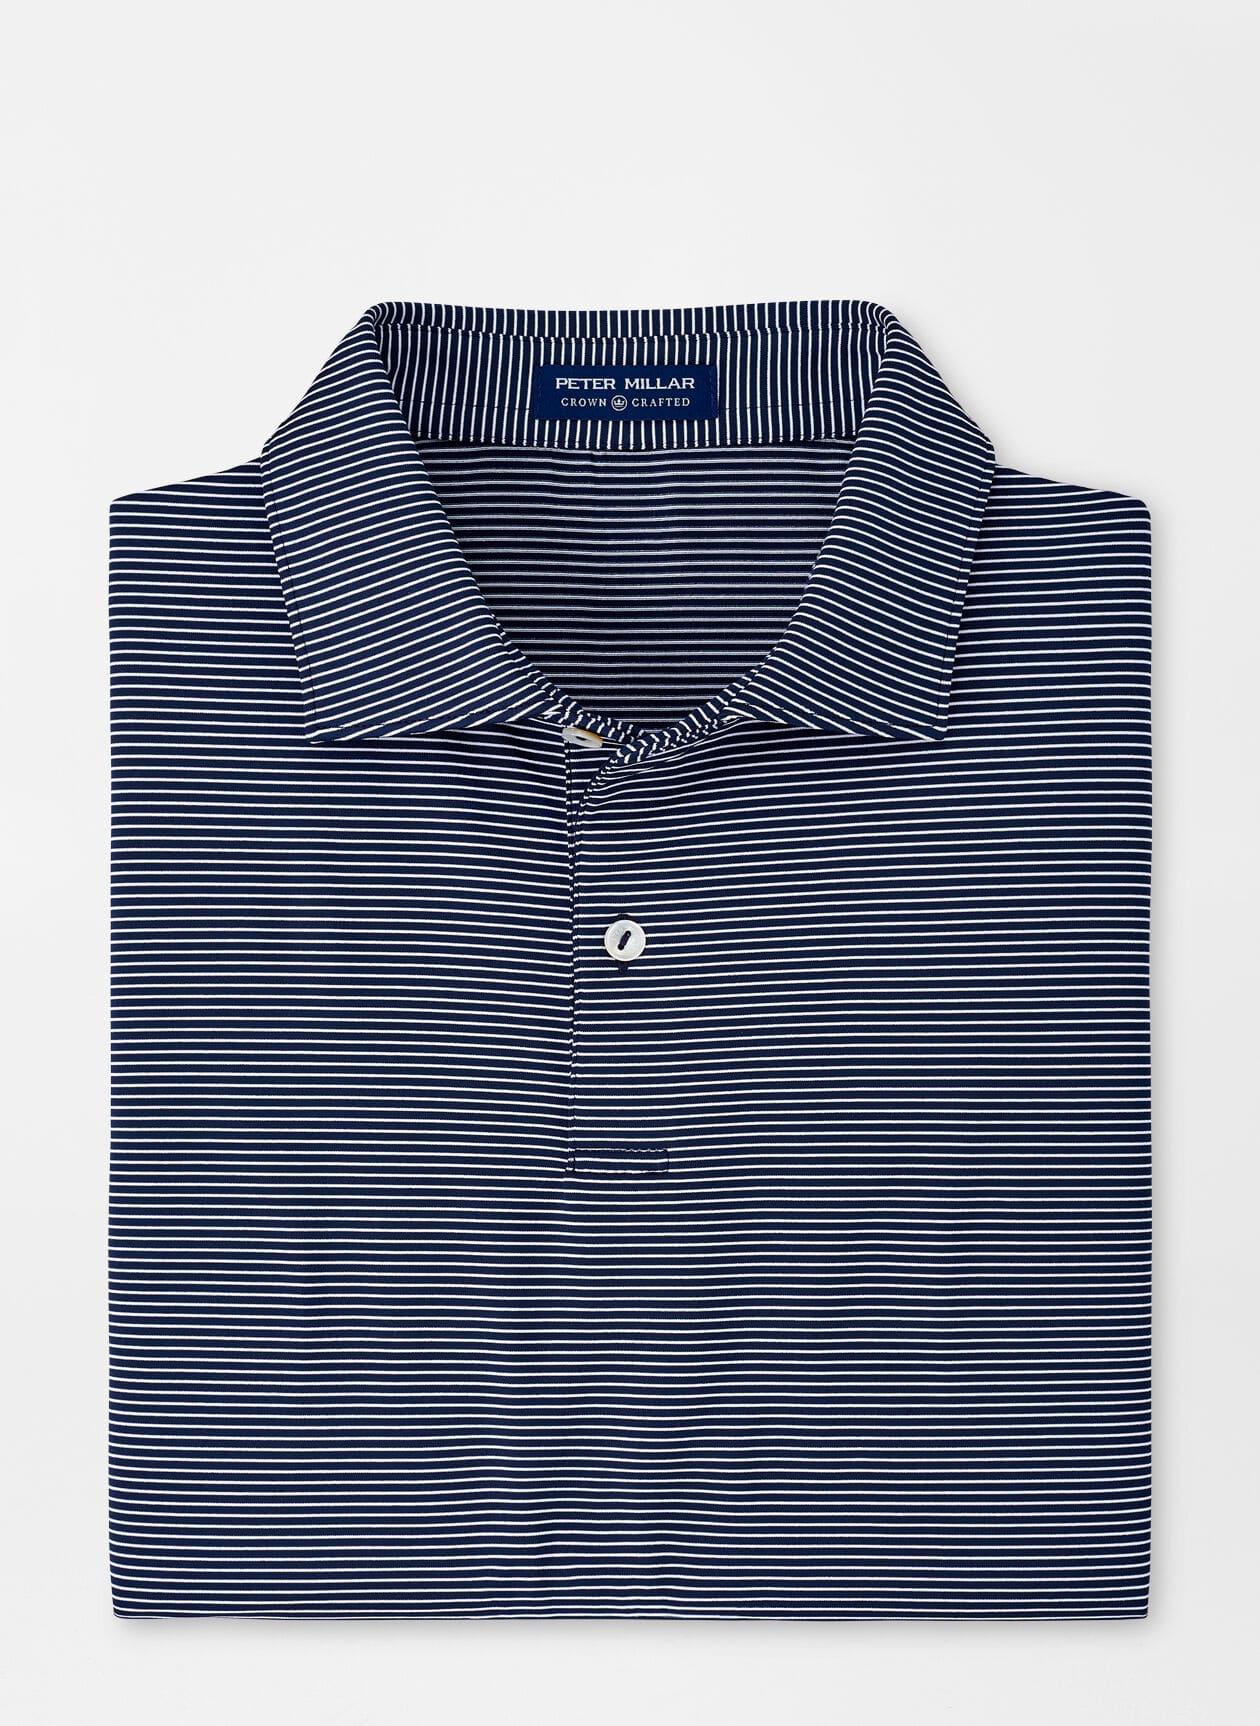 Peter Millar - blue and white knit shirt - strip knit shirt - Father's Day gift ideas